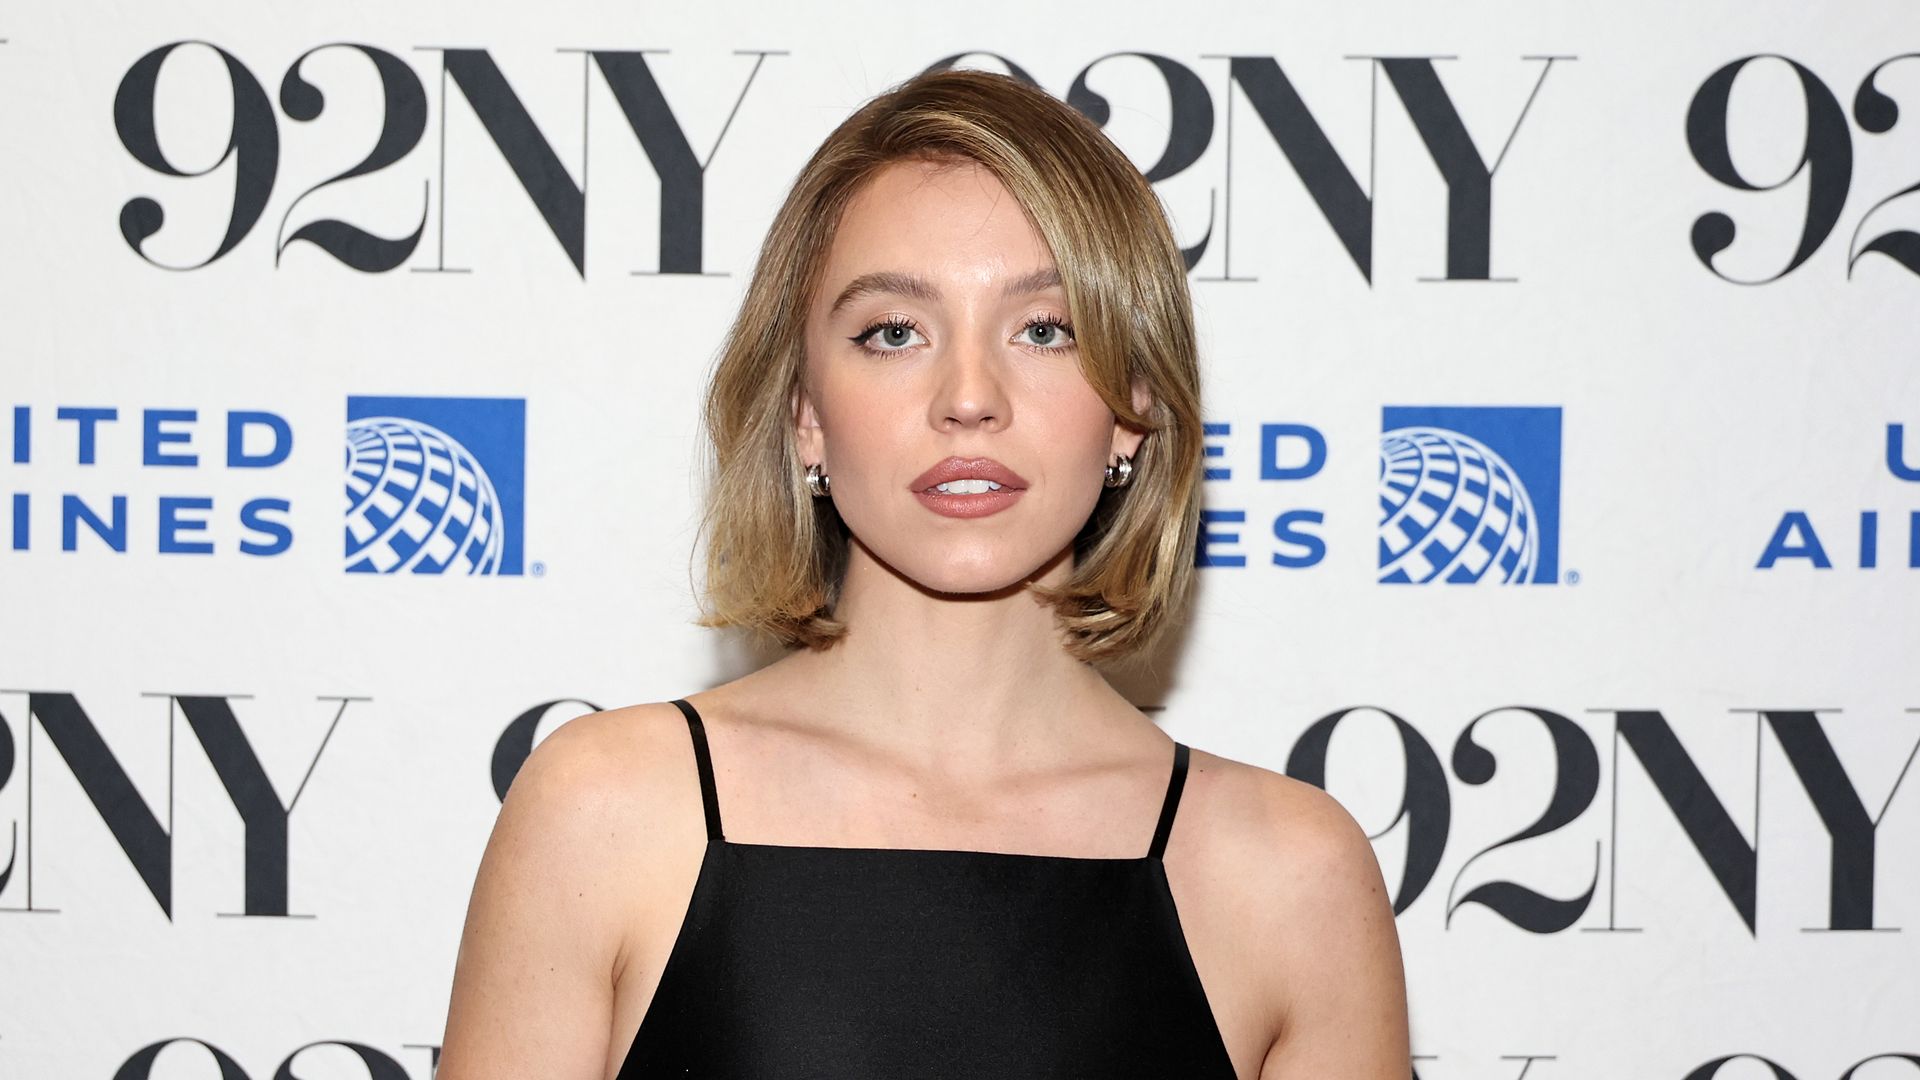 Sydney Sweeney exposes tiny waist and endless legs in partially see-through mini-dress